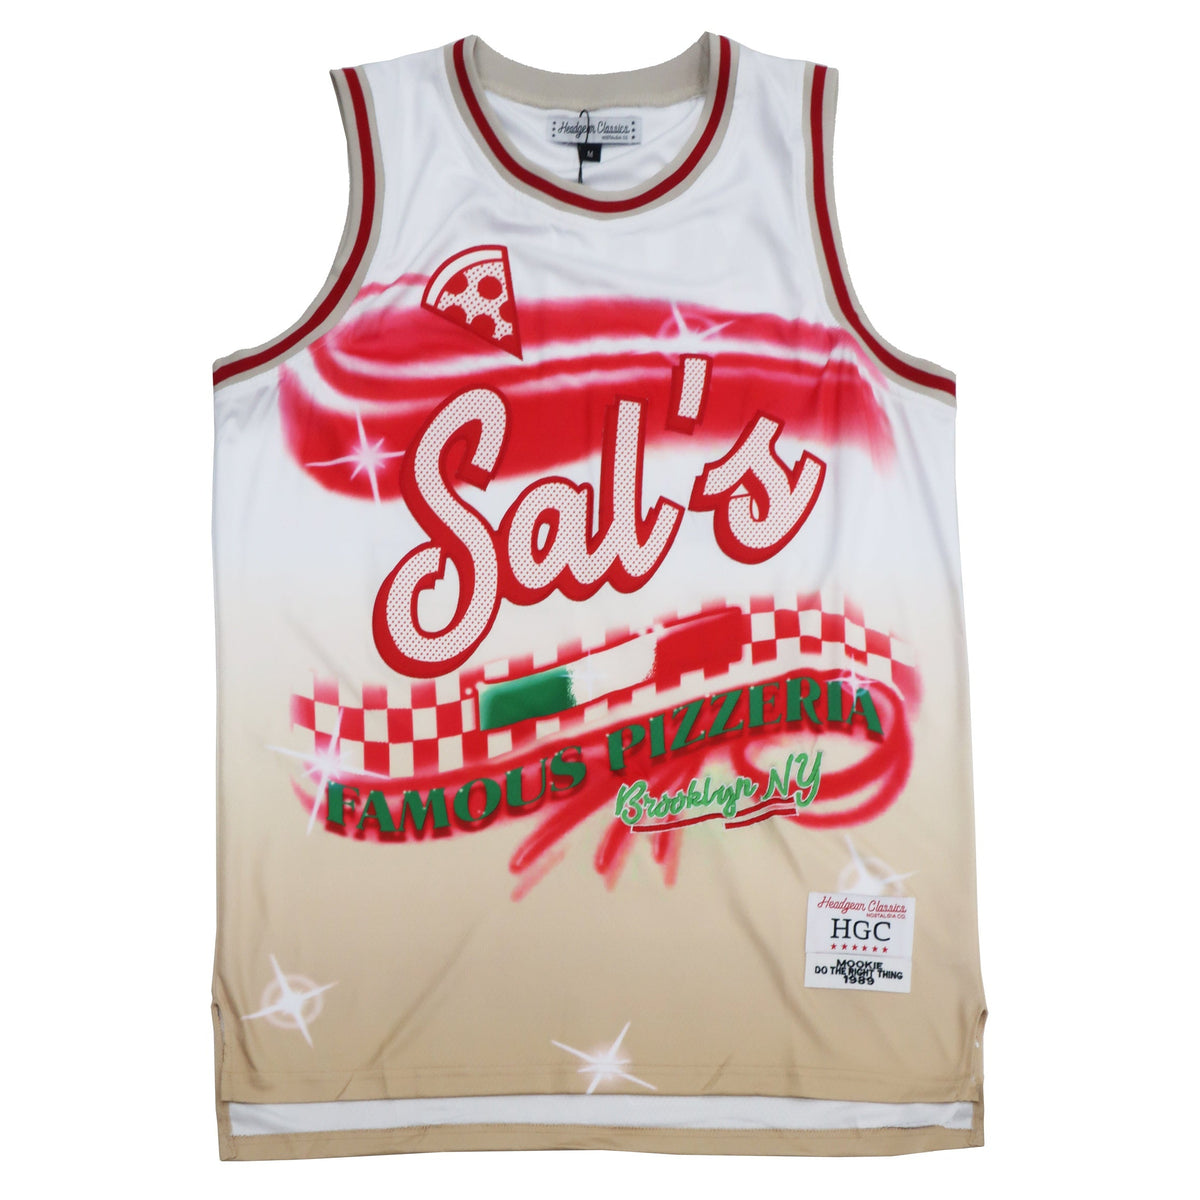 Carter Classic – Pacific – Jersey Nerds Media